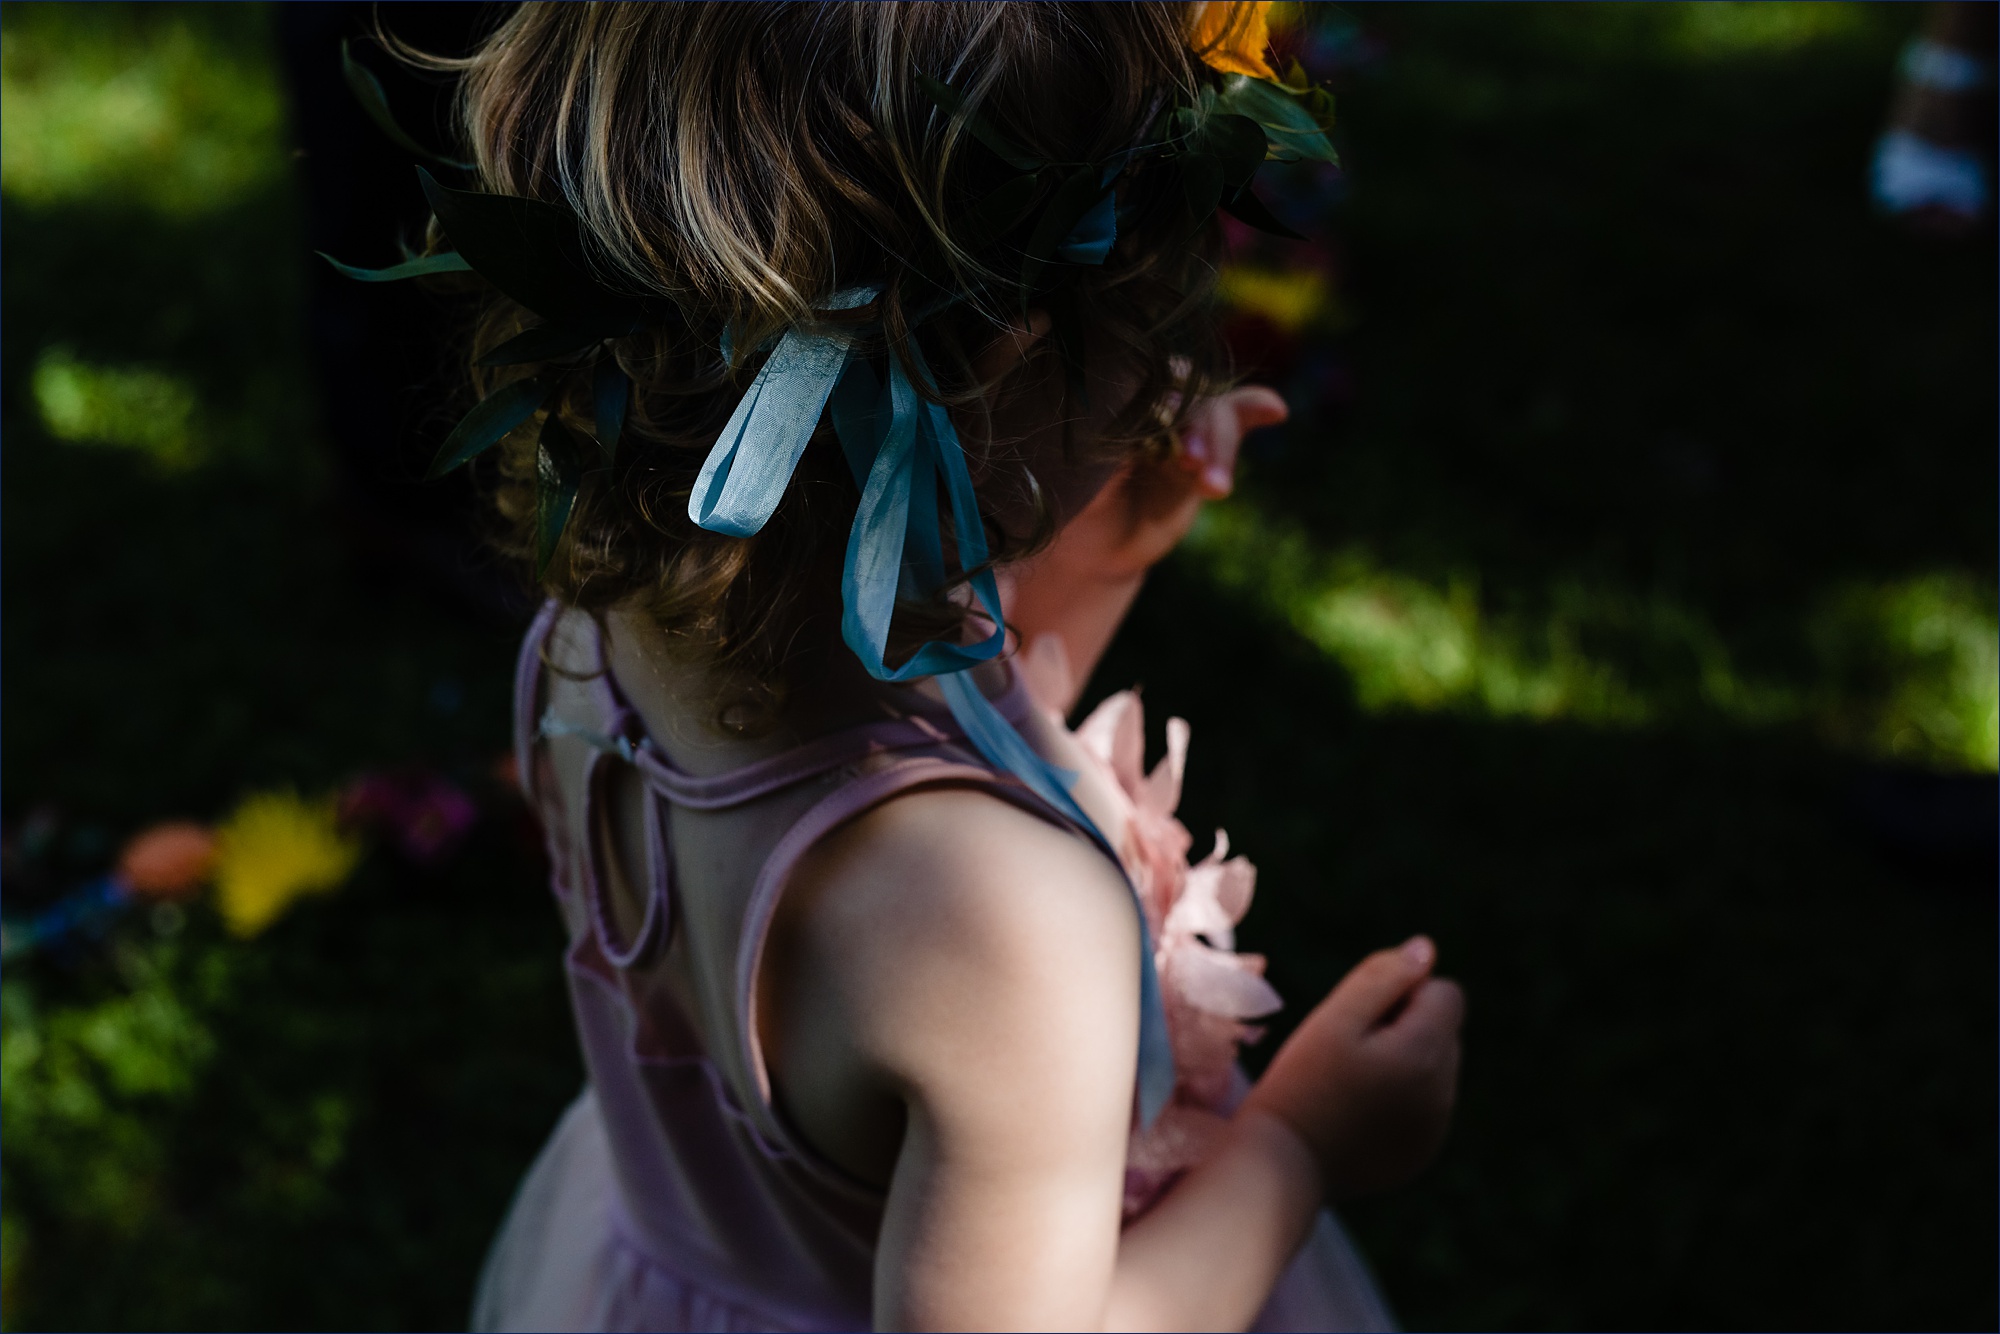 The flower girl's ribbons in the bright sun of her aunt's wedding day